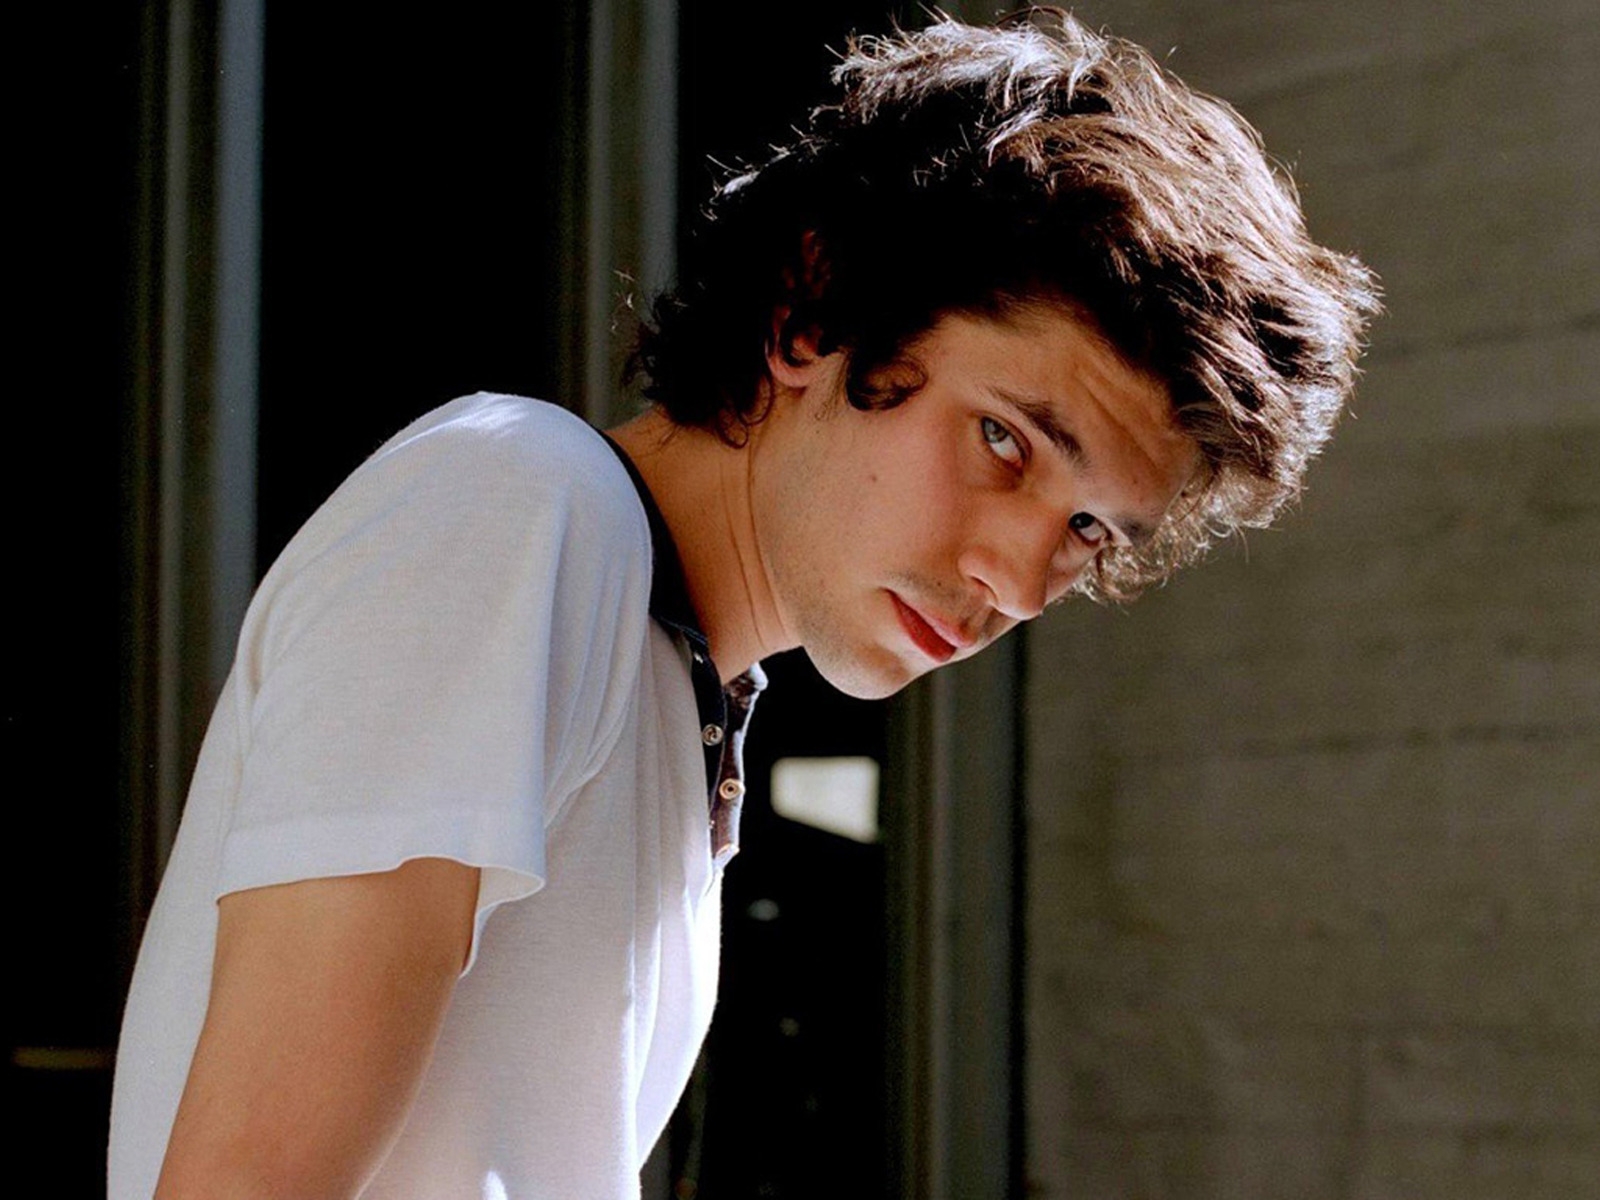 Ben Whishaw for 1600 x 1200 resolution